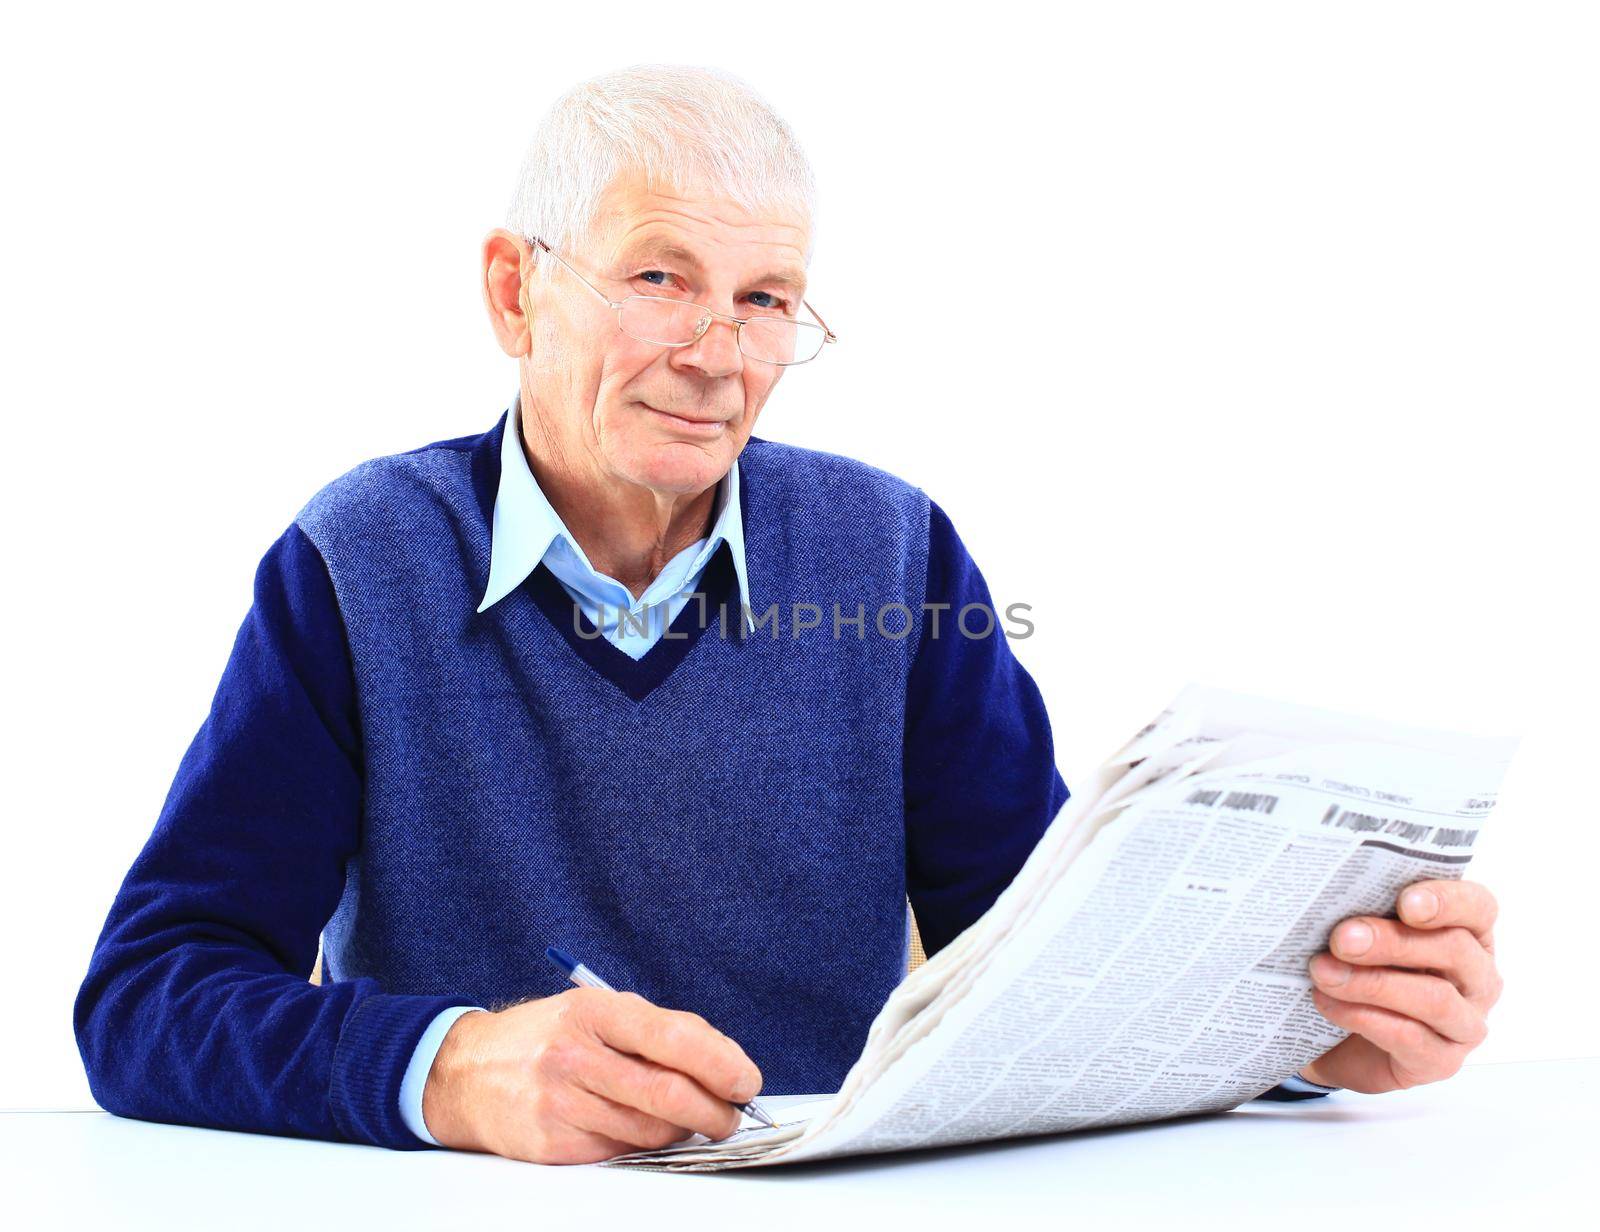 Portrait of an old man solving crosswords in the newspaper